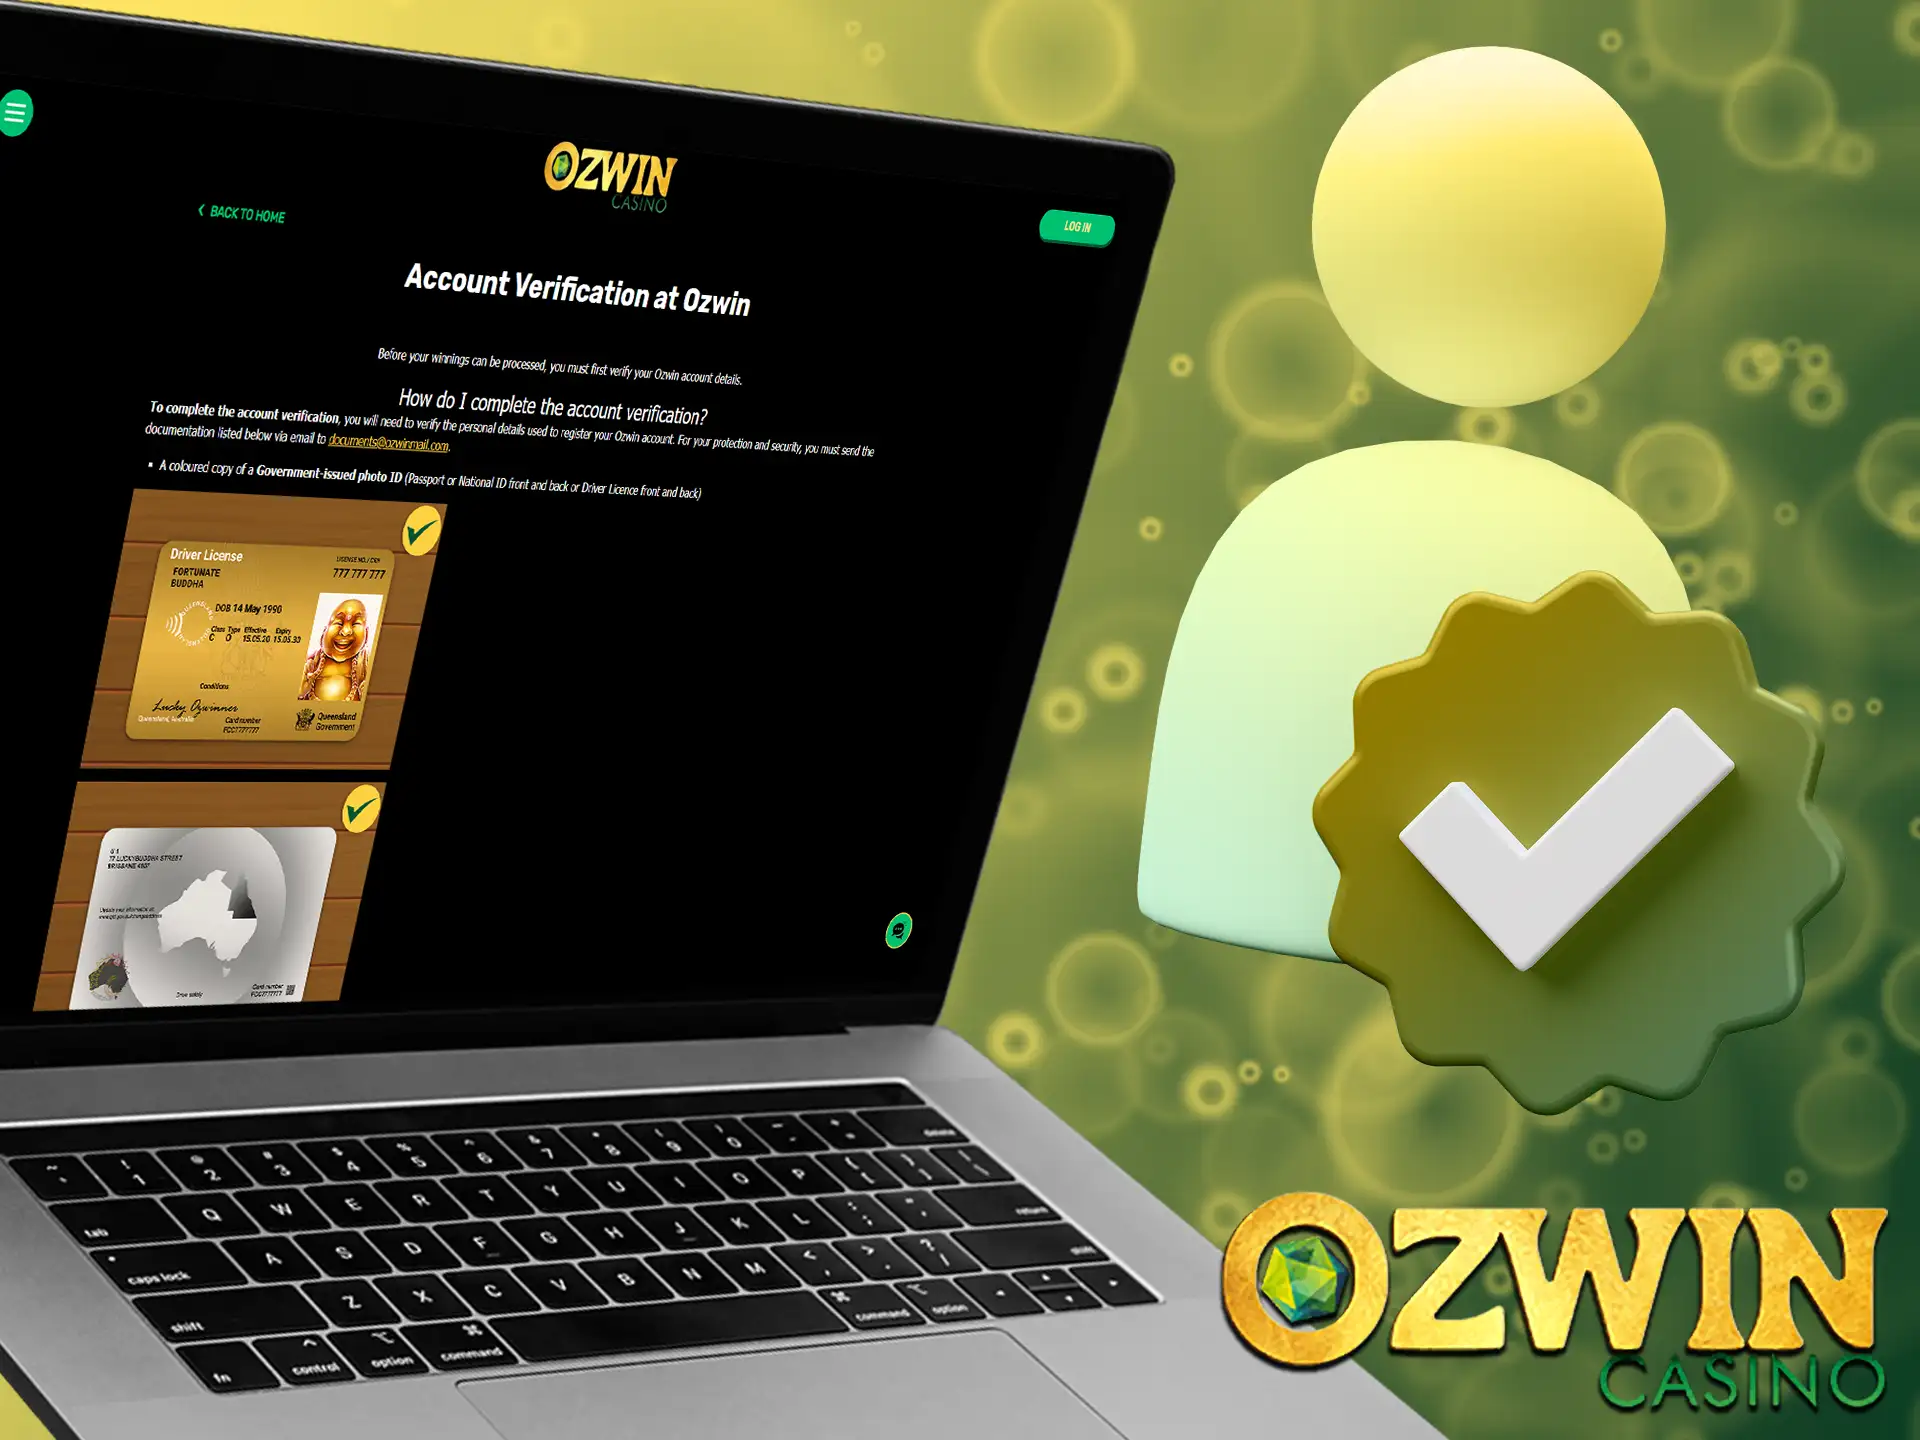 For security reasons, Ozwin asks you to complete an account verification procedure by sending some documents to our mail.